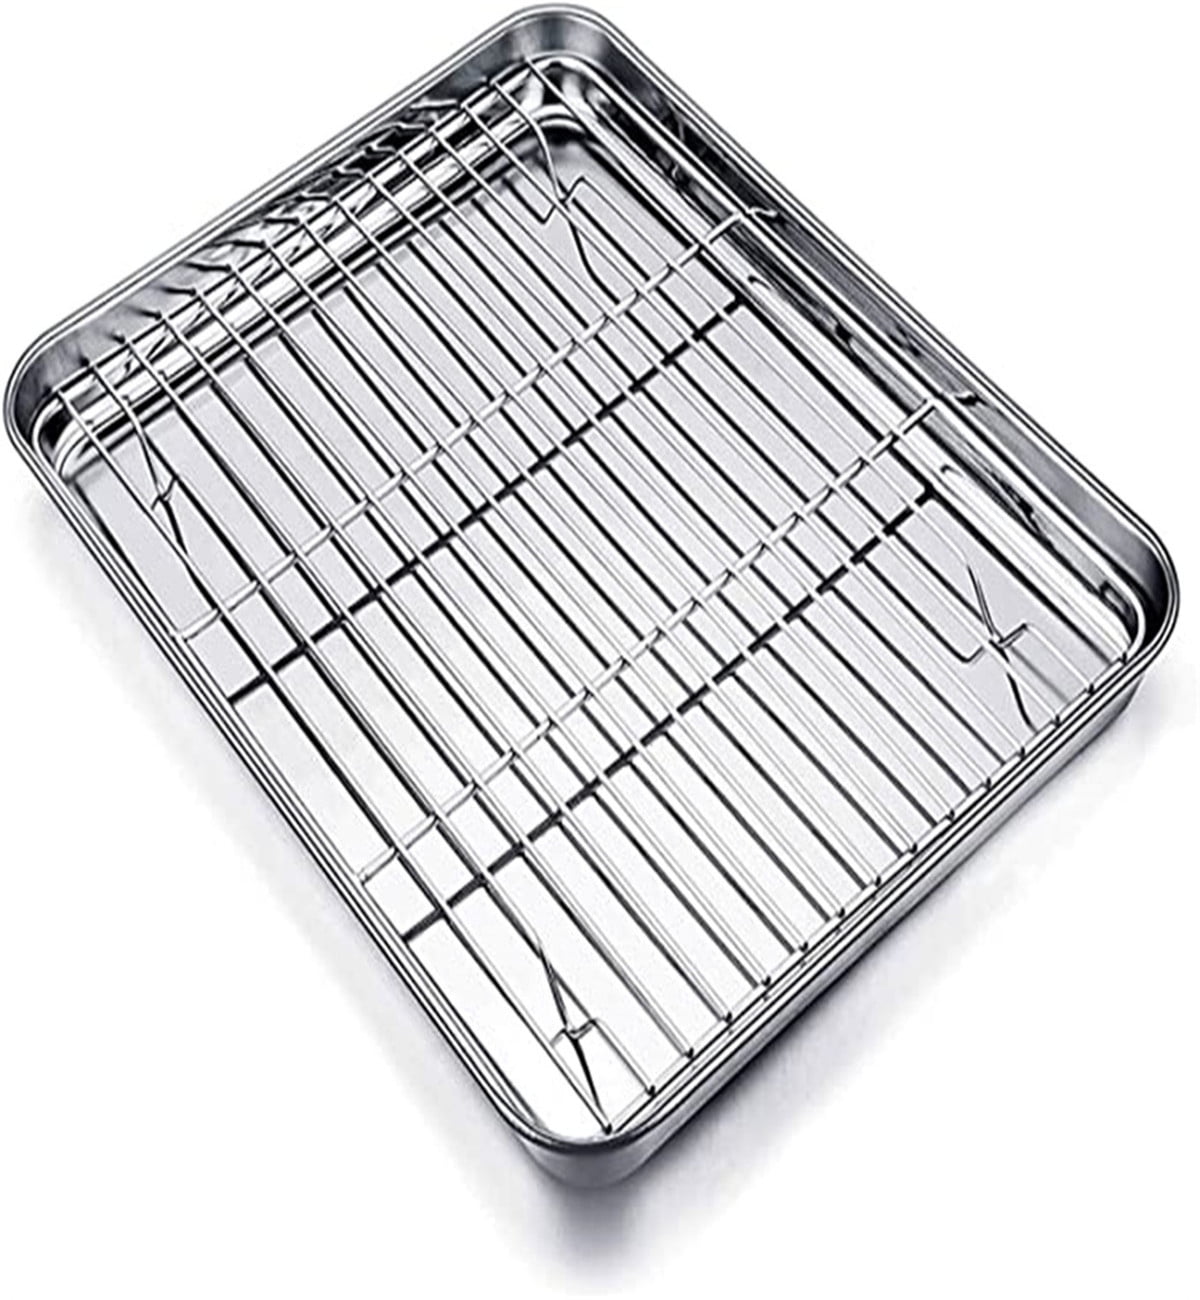 4 PCs Small Baking Sheet with Wire Rack Set [2 Baking Pans + 2 Cooling  Racks], CEKEE 10 Inch Stainless Steel Small Baking Tray with Rack Set -  Rust 